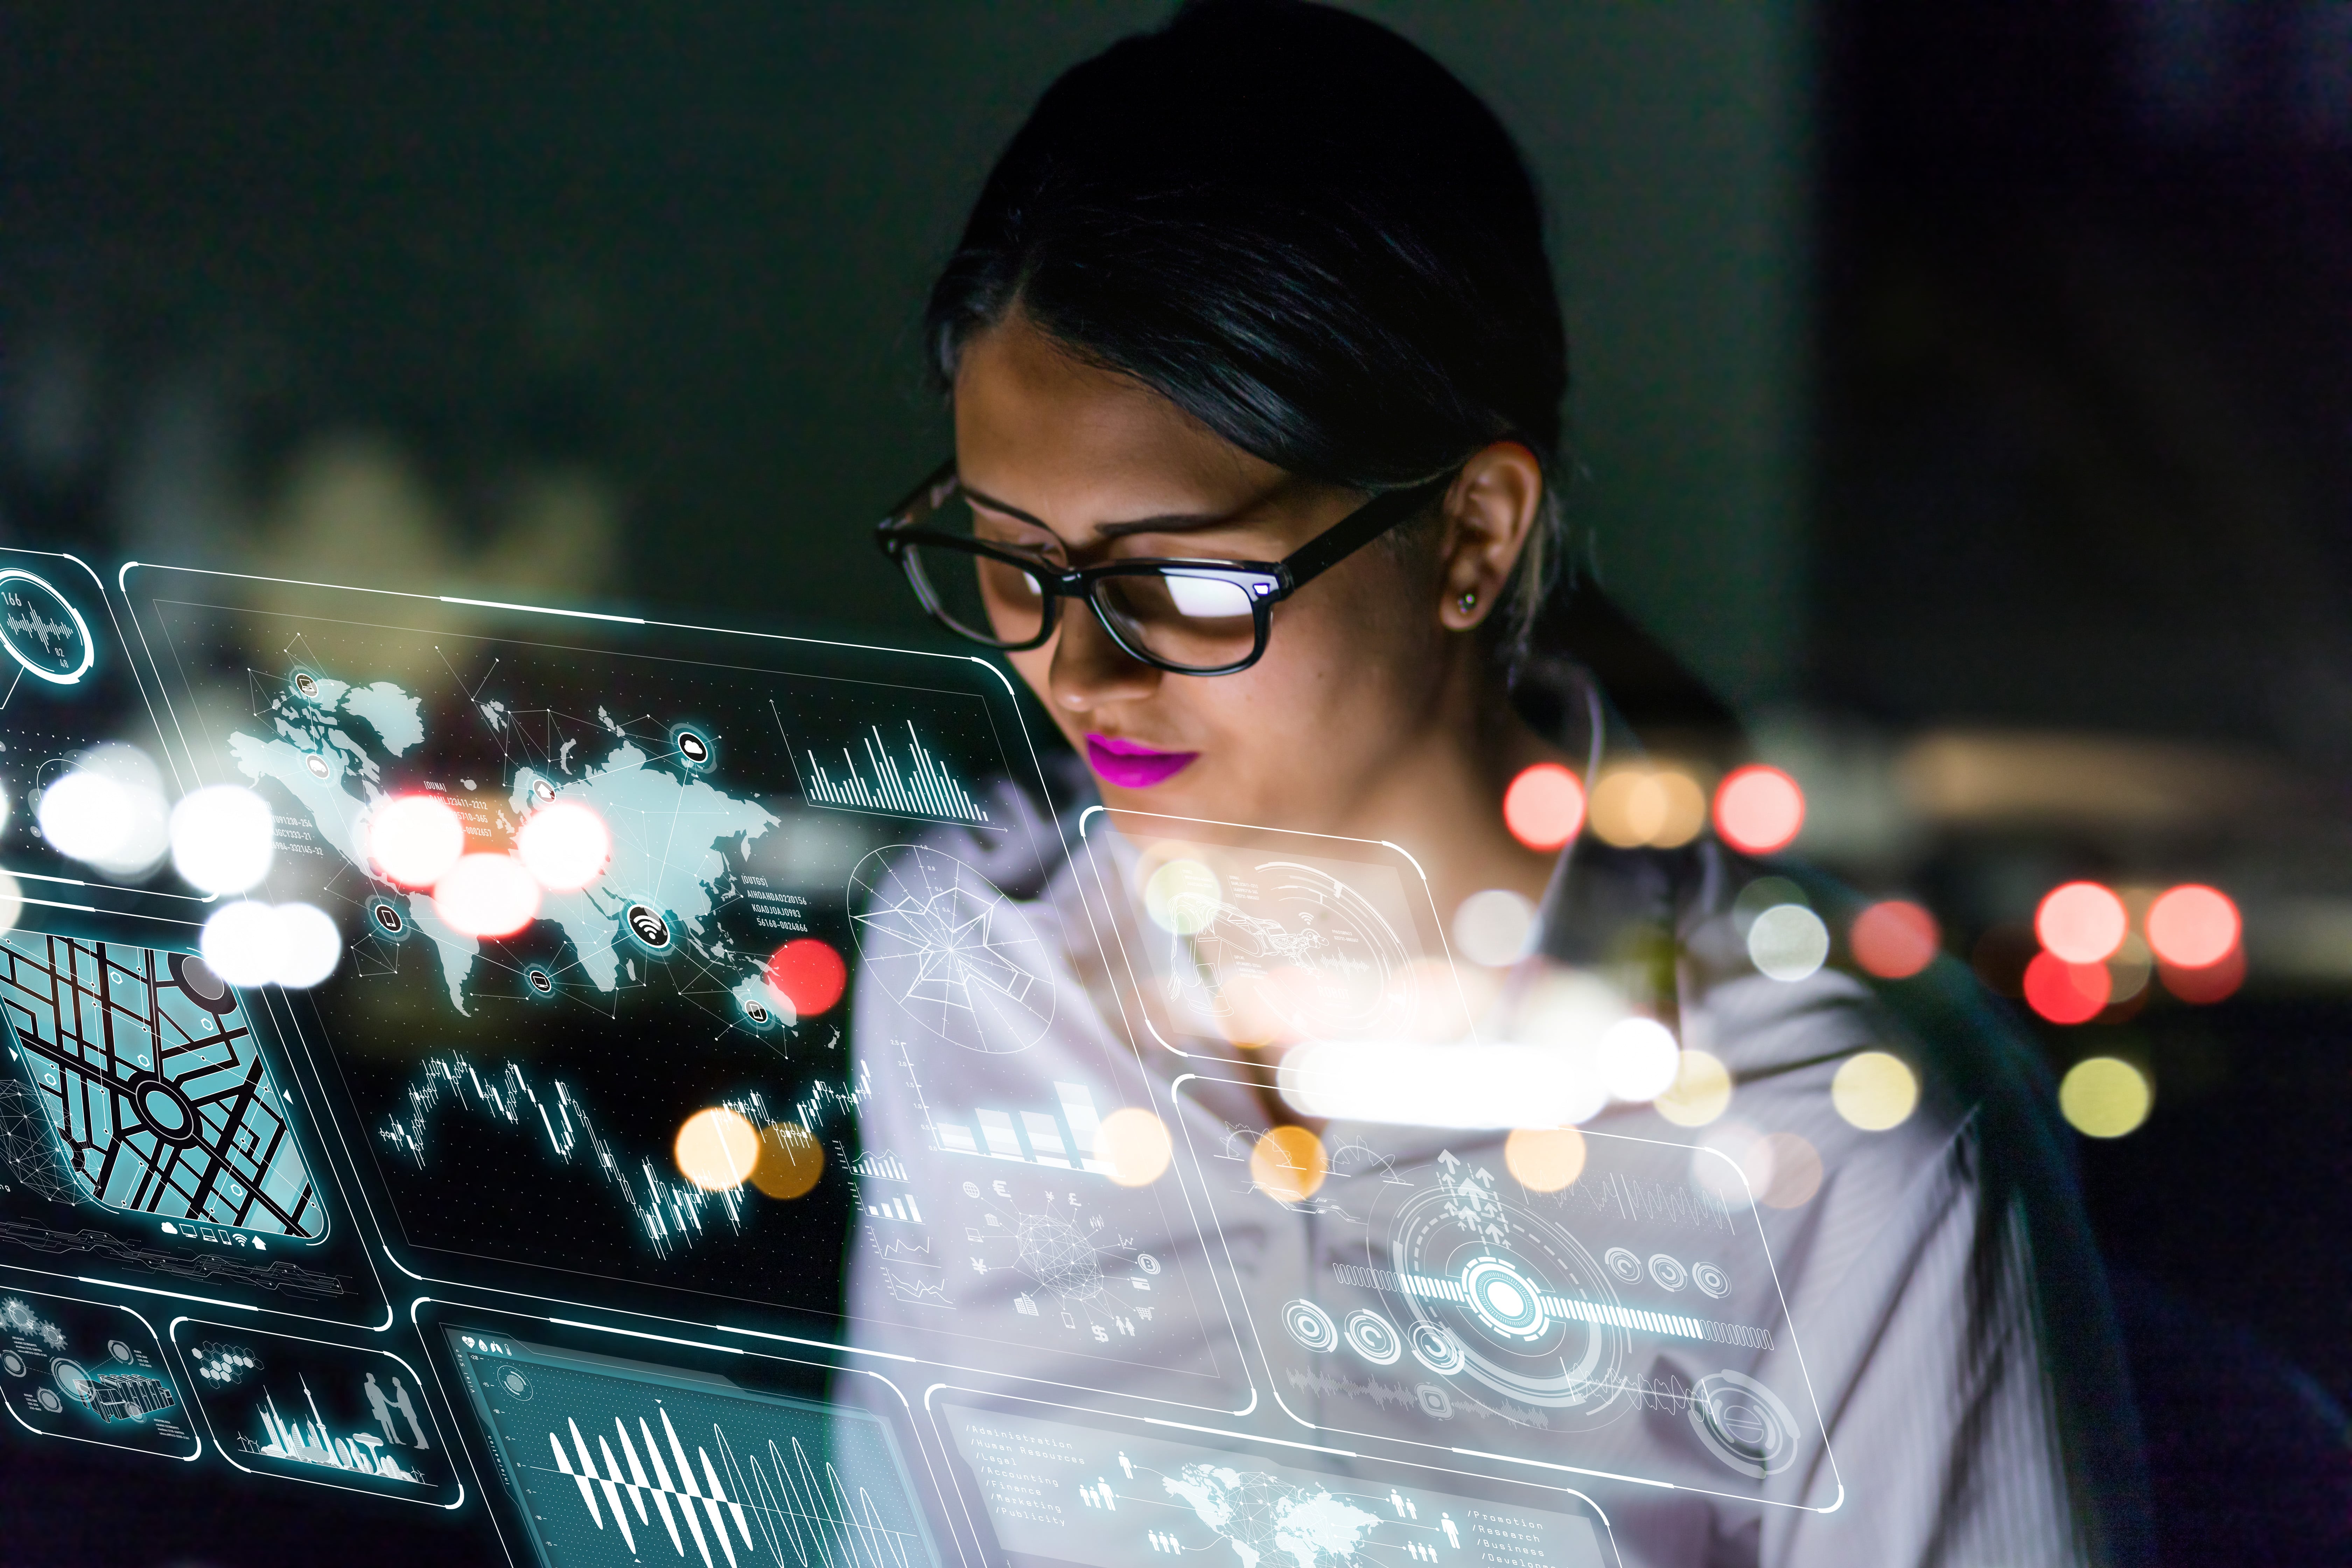 SAP: Check Out Six Trends in the World of Work Industry 4.0